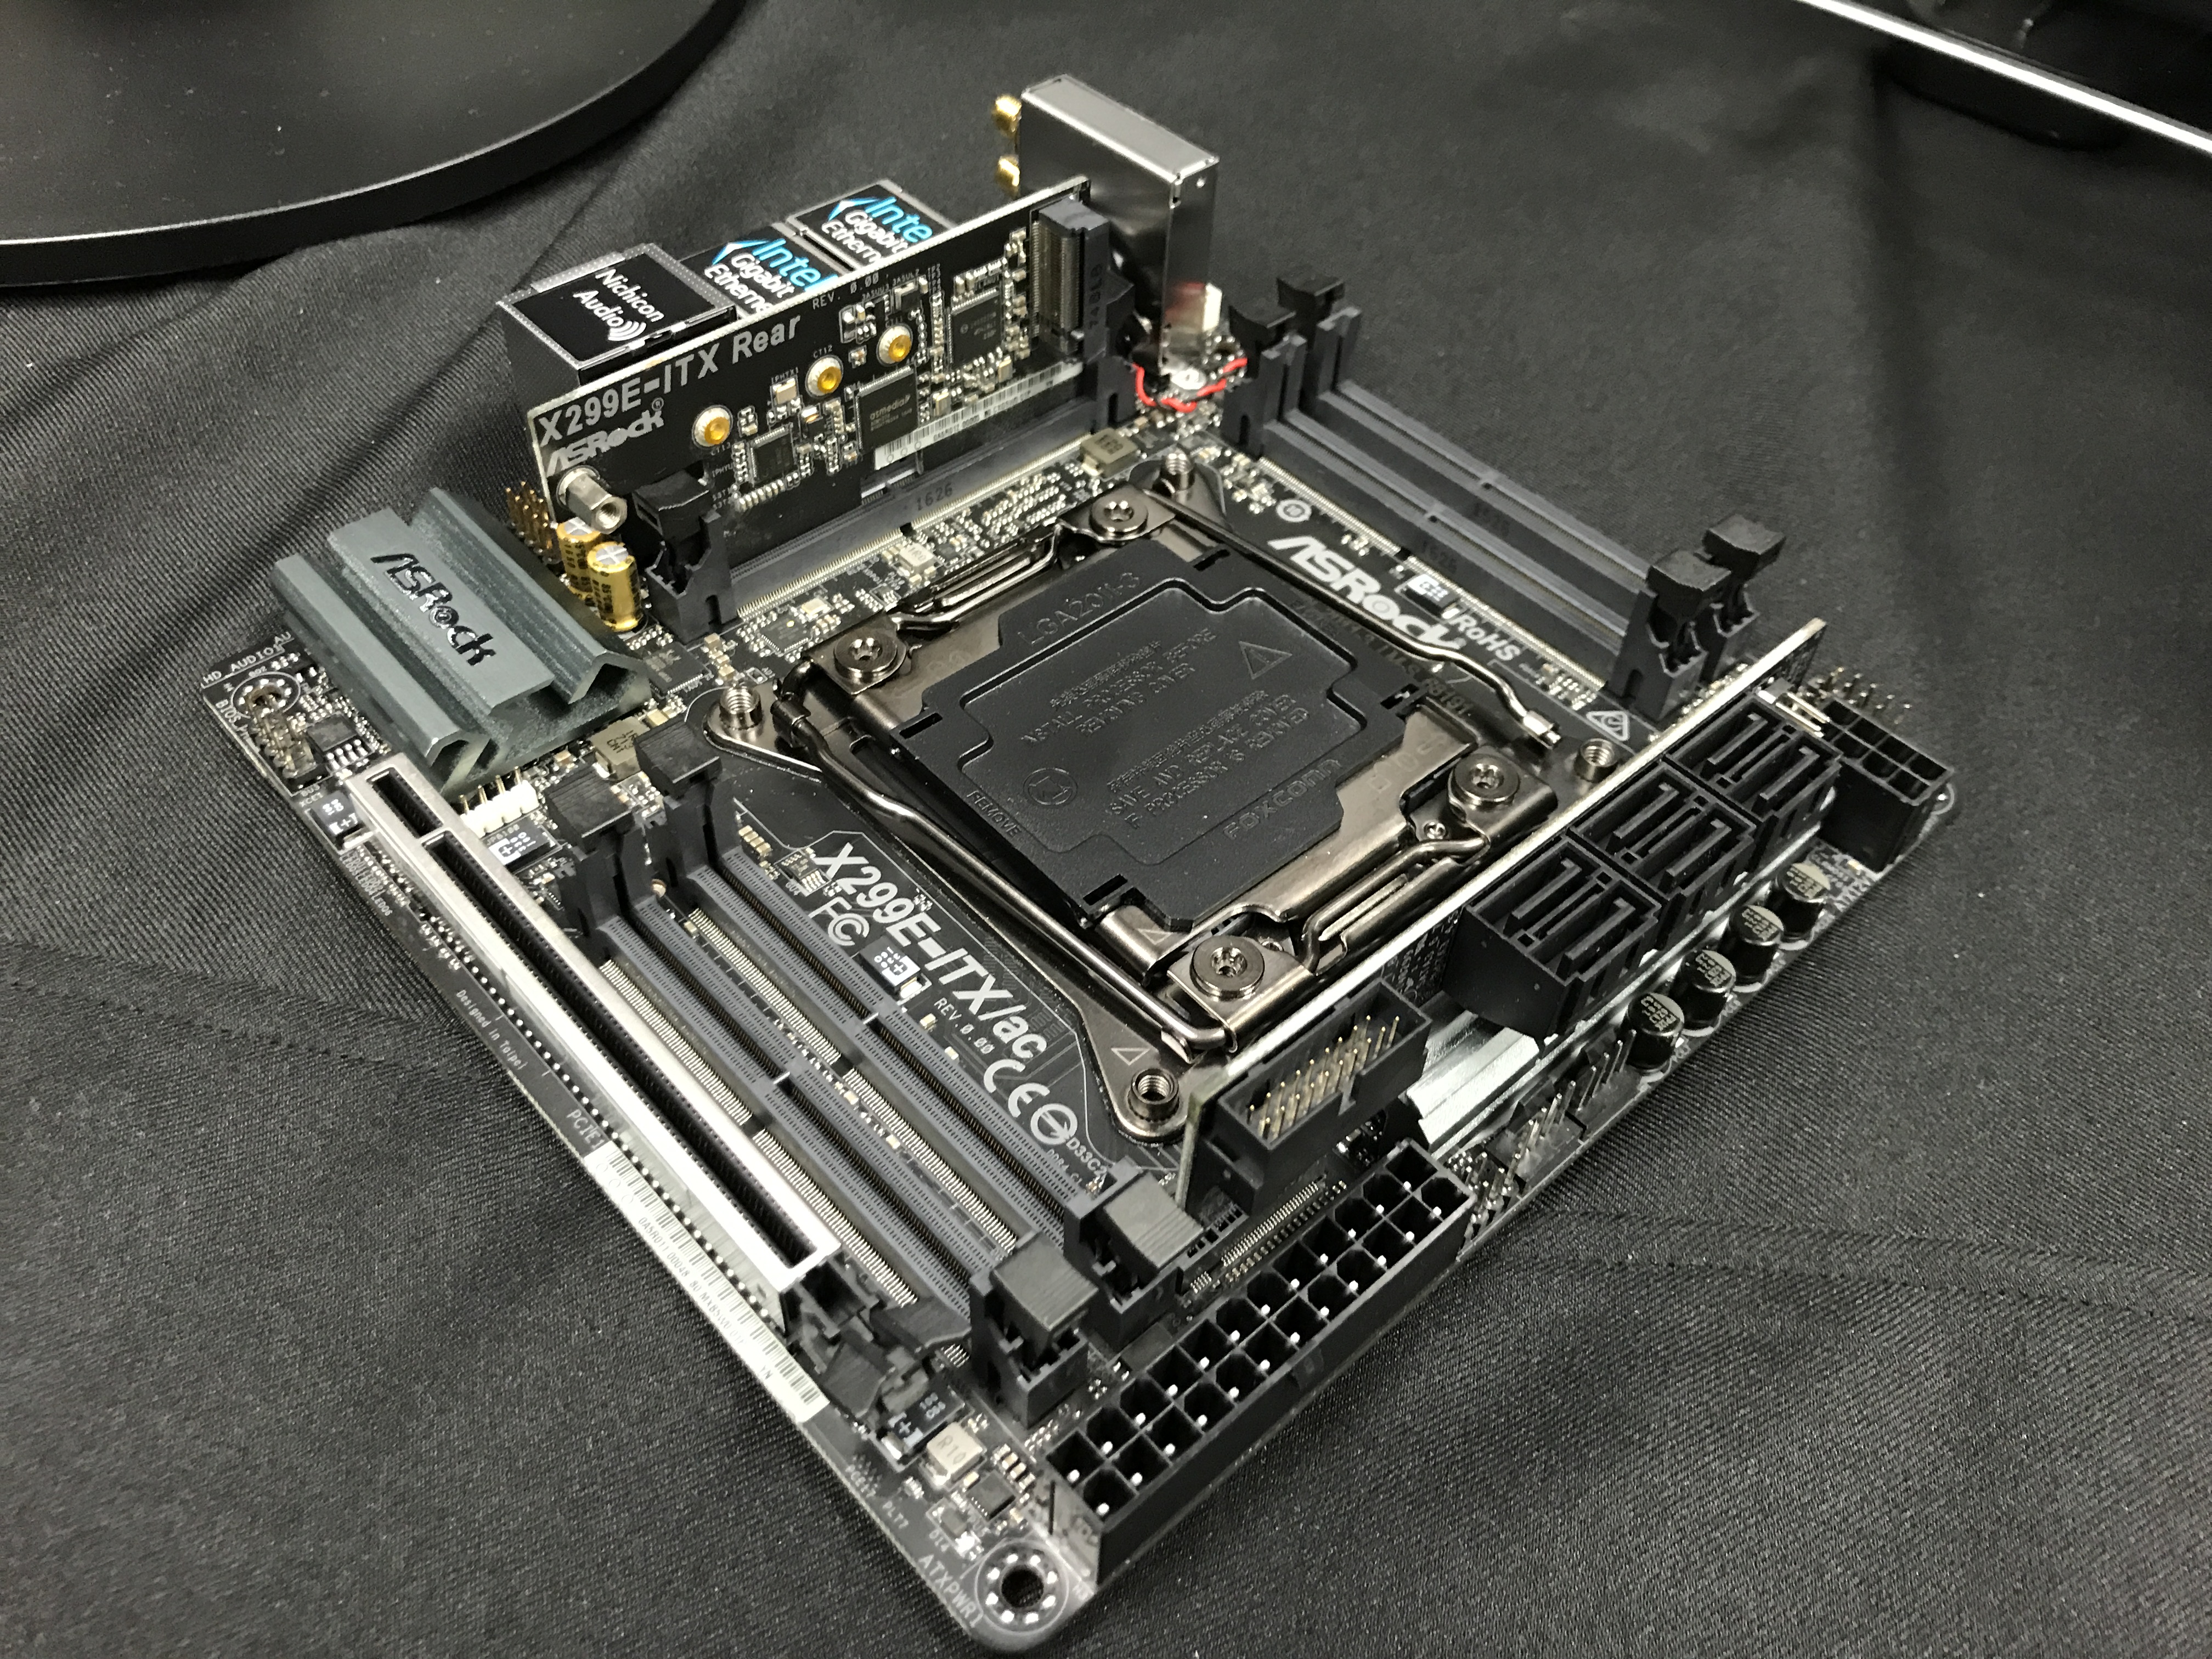 Krage lur bur Mighty Mini-ITX: ASRock X299E-ITX/ac with 4 Channel DDR4 and 3xM.2 Support